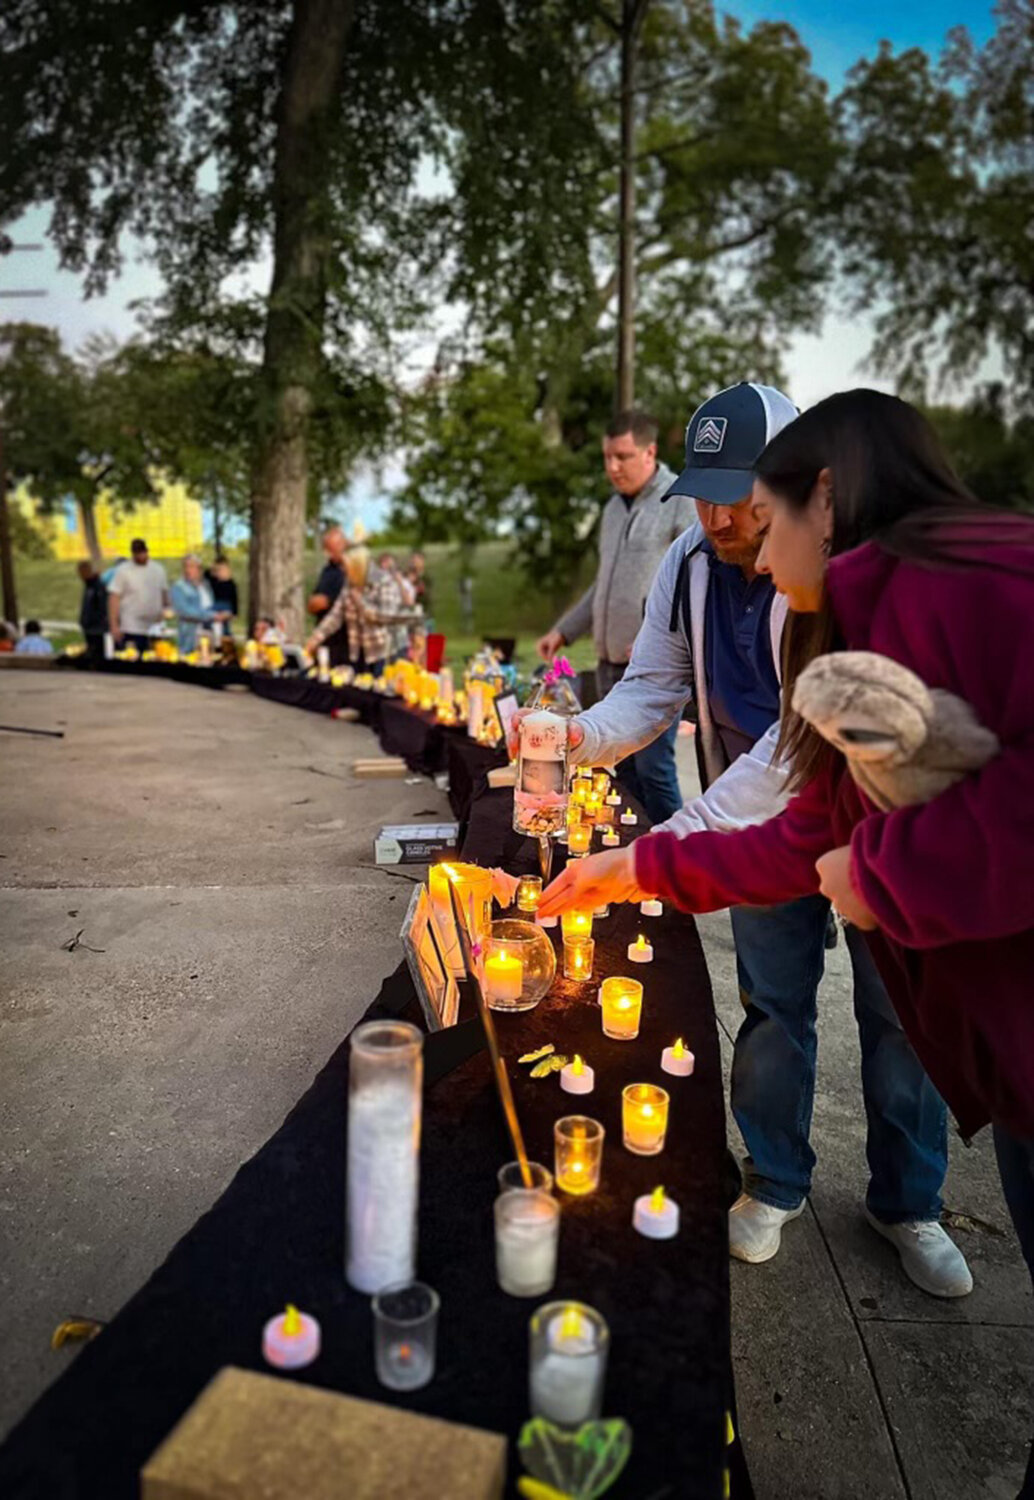 Grieving parents gather to remember their lost children as part of an event sponsored by the non-profit A Memory Grows.